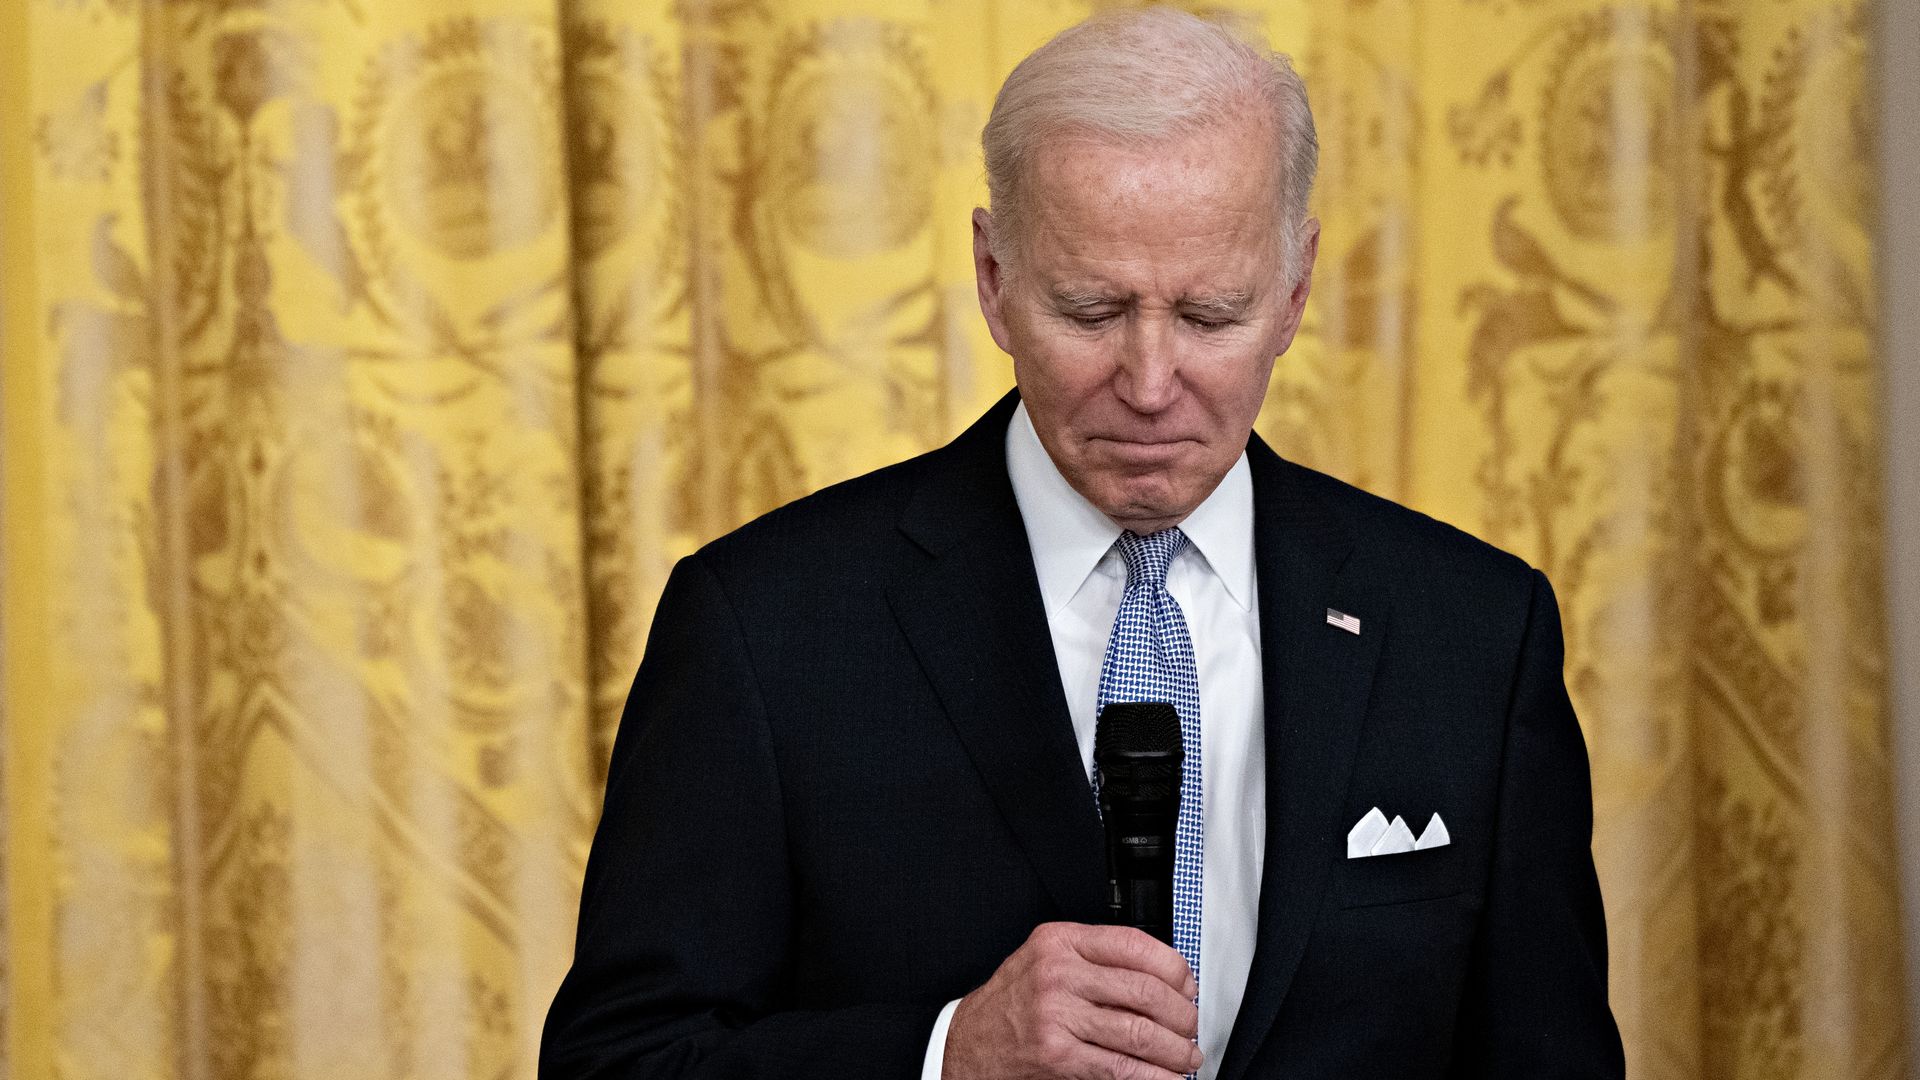 US President Joe Biden listens to a question during an event with a bipartisan group of mayors 